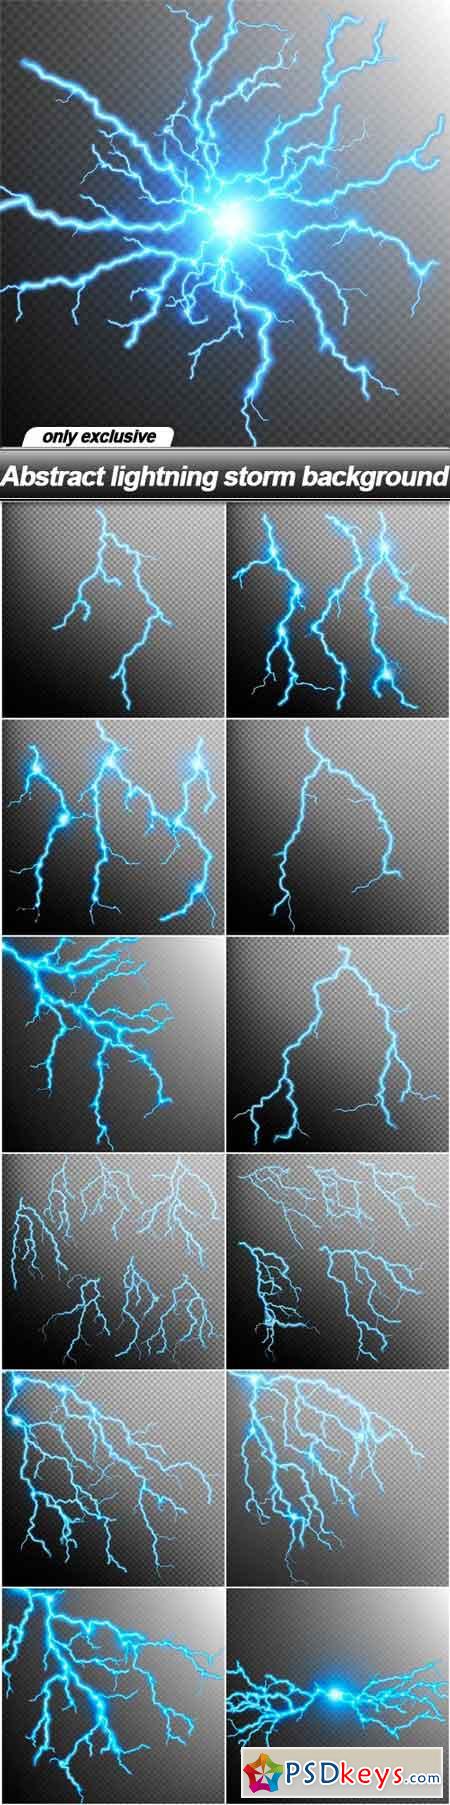 Abstract lightning storm background - 13 EPS